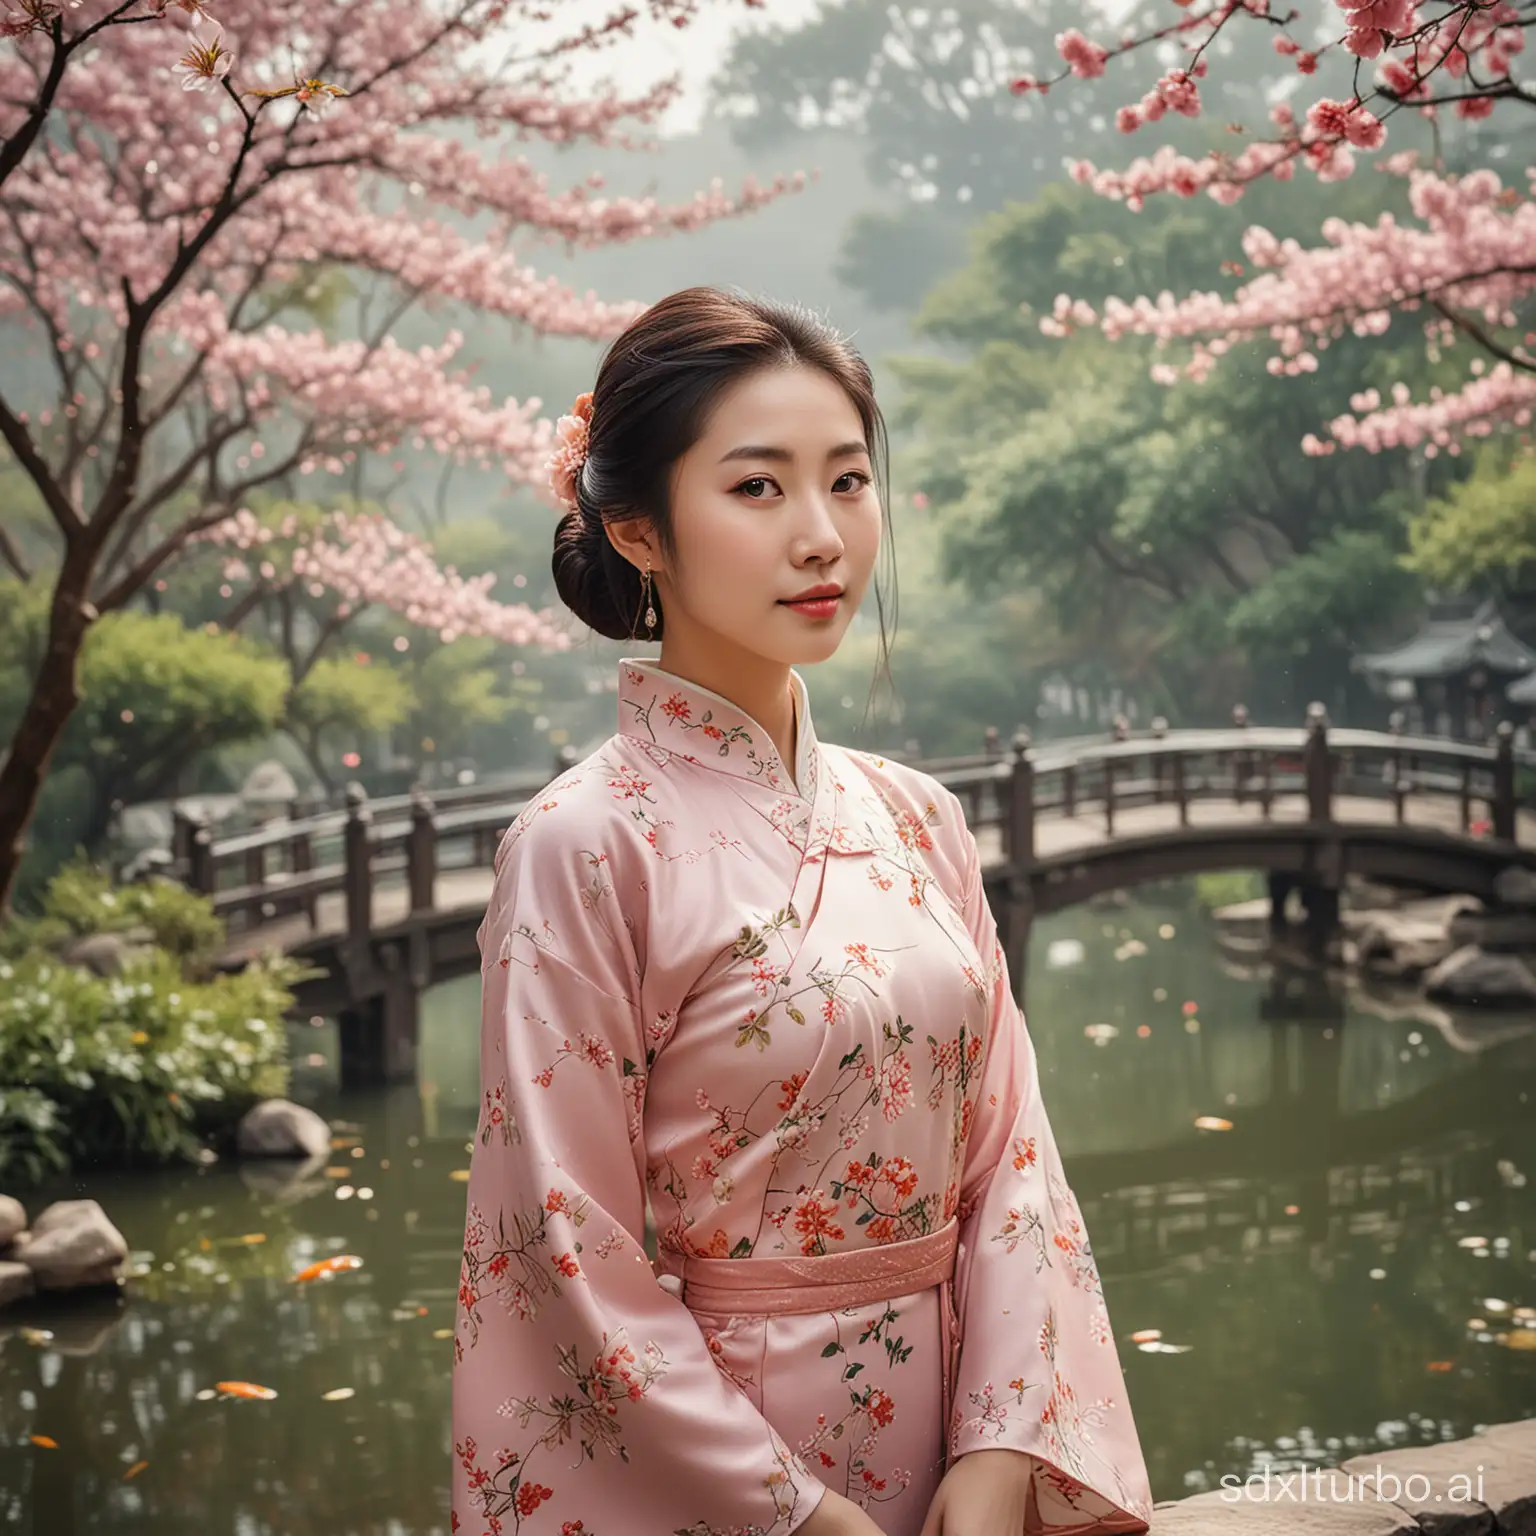 portrait photograph of a young Chinese woman in a traditional Cheongsam dress, serene and inviting aura, delicate oval face, porcelain-like fair complexion, almond-shaped sparkling dark brown eyes, finely arched eyebrows, elegantly sculpted nose, naturally rosy lips with a bright smile and dimples, long straight black hair, serene traditional Chinese garden background with cherry blossoms, arched bridge over a koi pond, mist-covered mountains, ultra realistic, traditional elegance, cultural roots, harmony, art by Chen Man and Zhang Jingna.